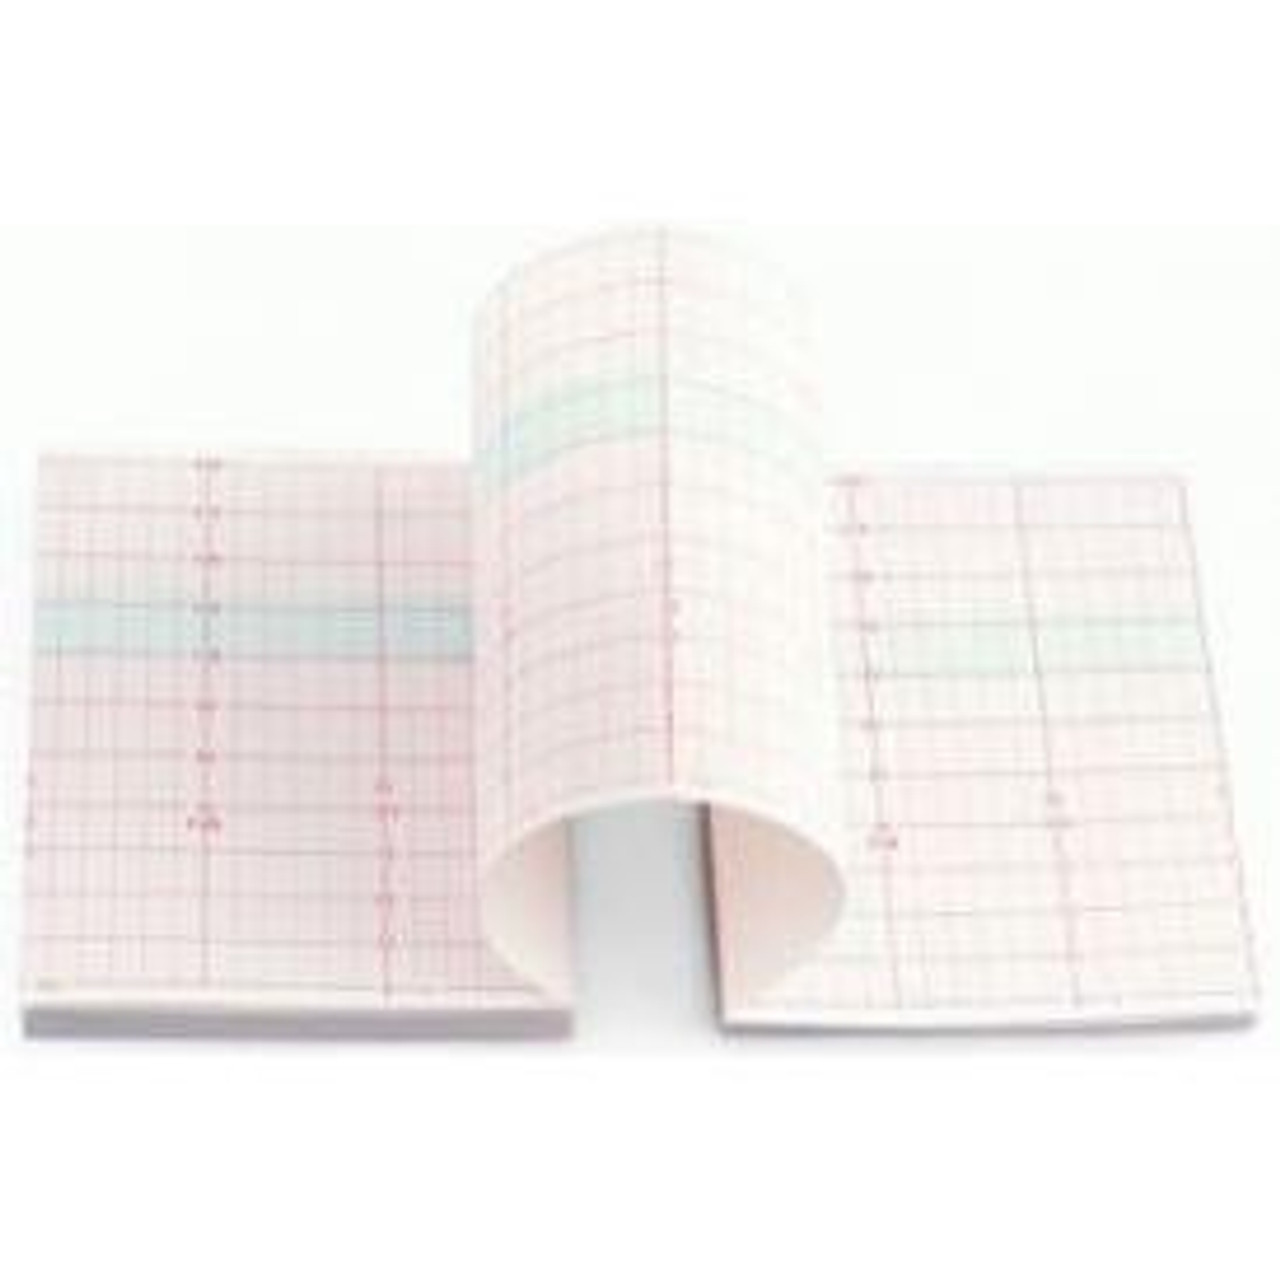 CooperSurgical F9 Fetal Monitor Recording Paper (3-Pack)